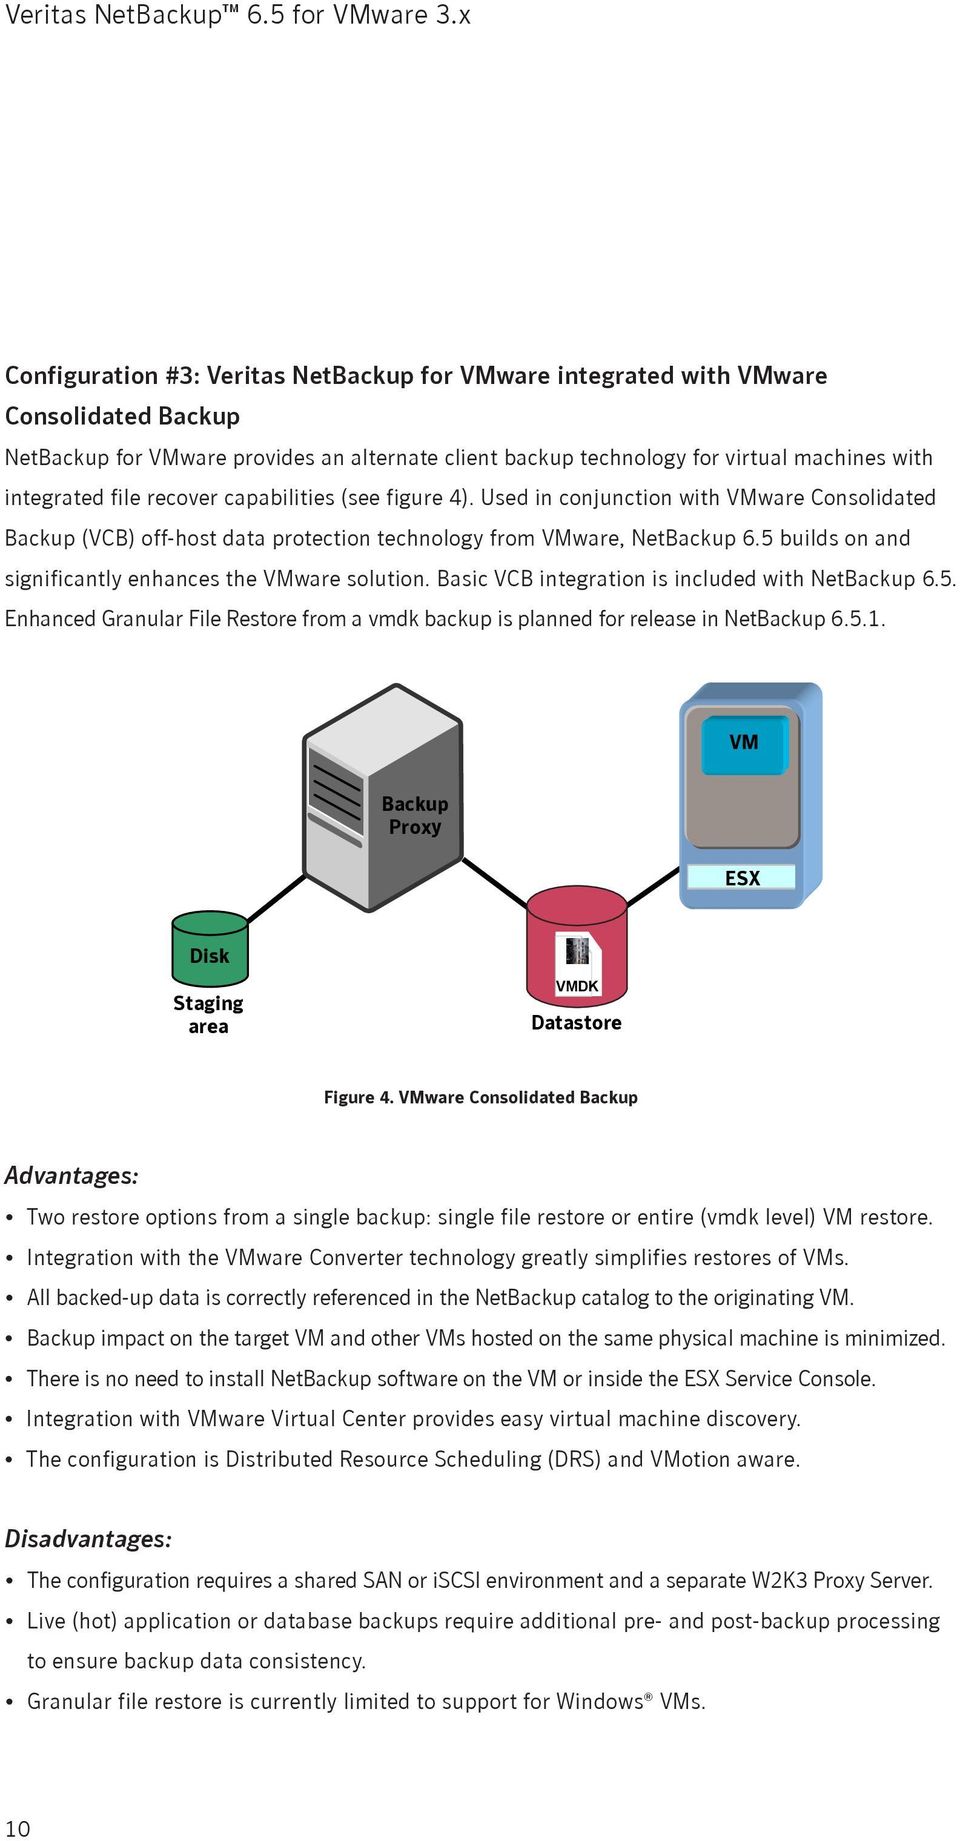 5 builds on and significantly enhances the VMware solution. Basic VCB integration is included with NetBackup 6.5. Enhanced Granular File Restore from a vmdk backup is planned for release in NetBackup 6.